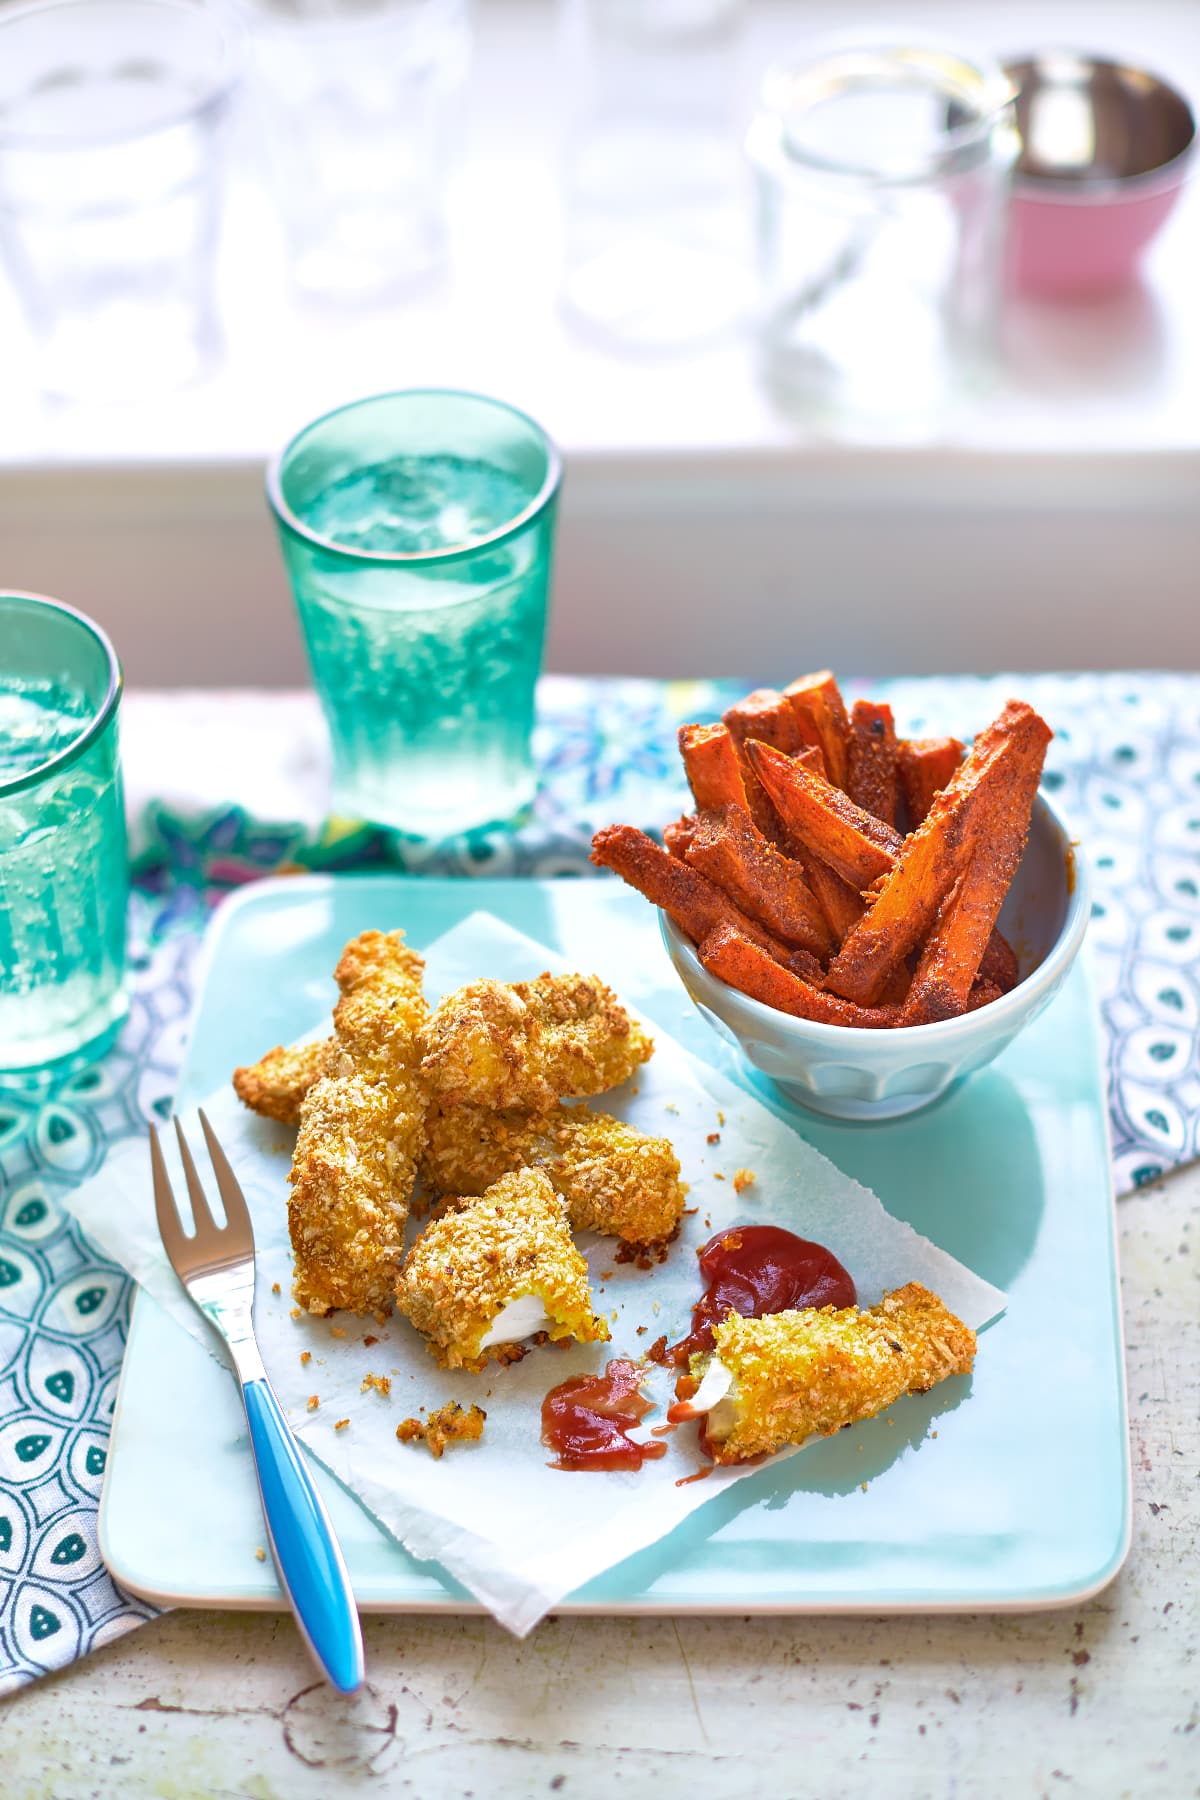 Homemade spicy fish sticks on a sheet of paper on a pale blue tray with ketchup. To the side is a white bowl filled with sweet potato fries.